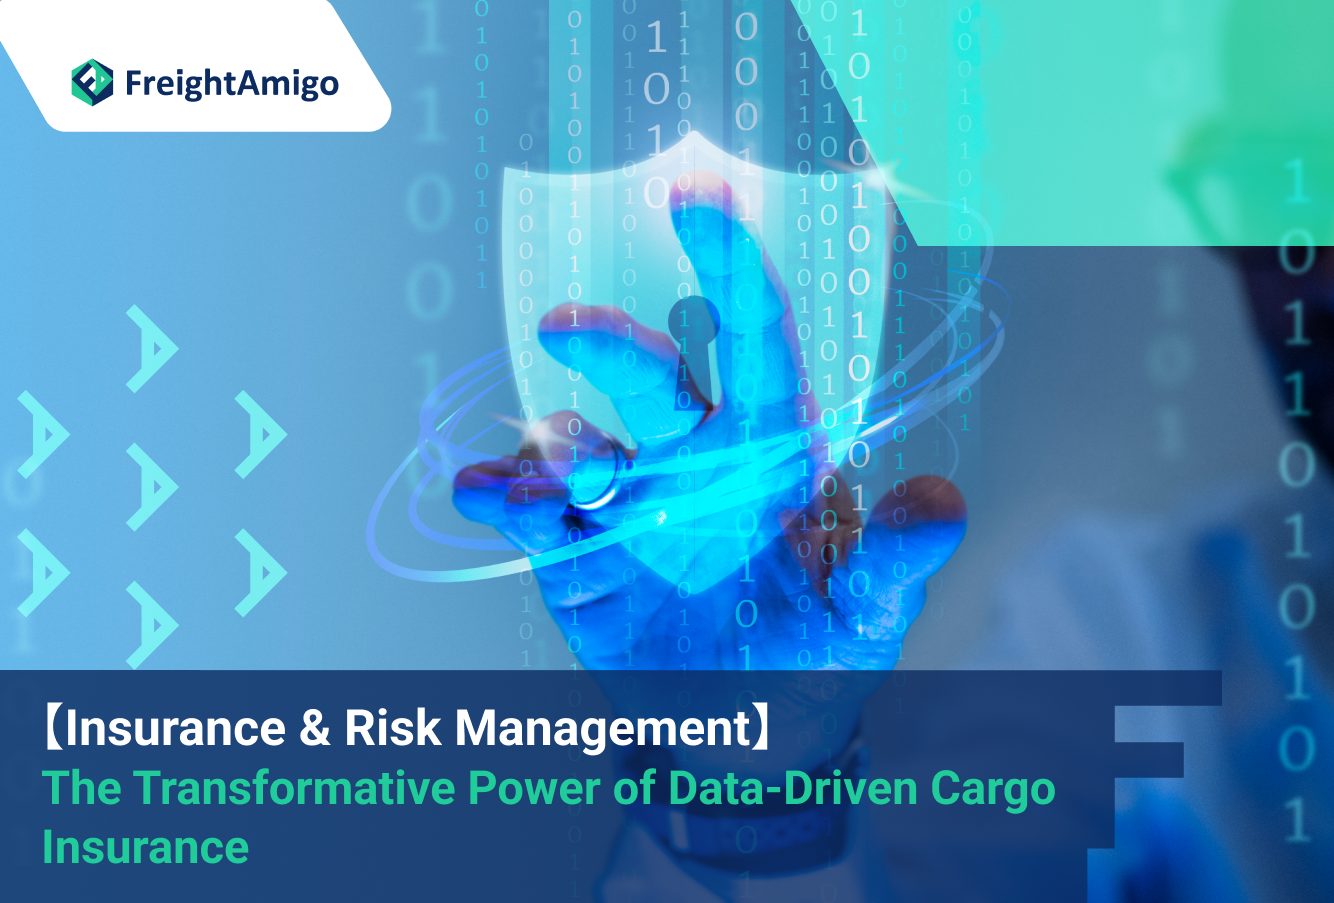 【Insurance & Risk Management】 The Transformative Power of Data-Driven Cargo Insurance